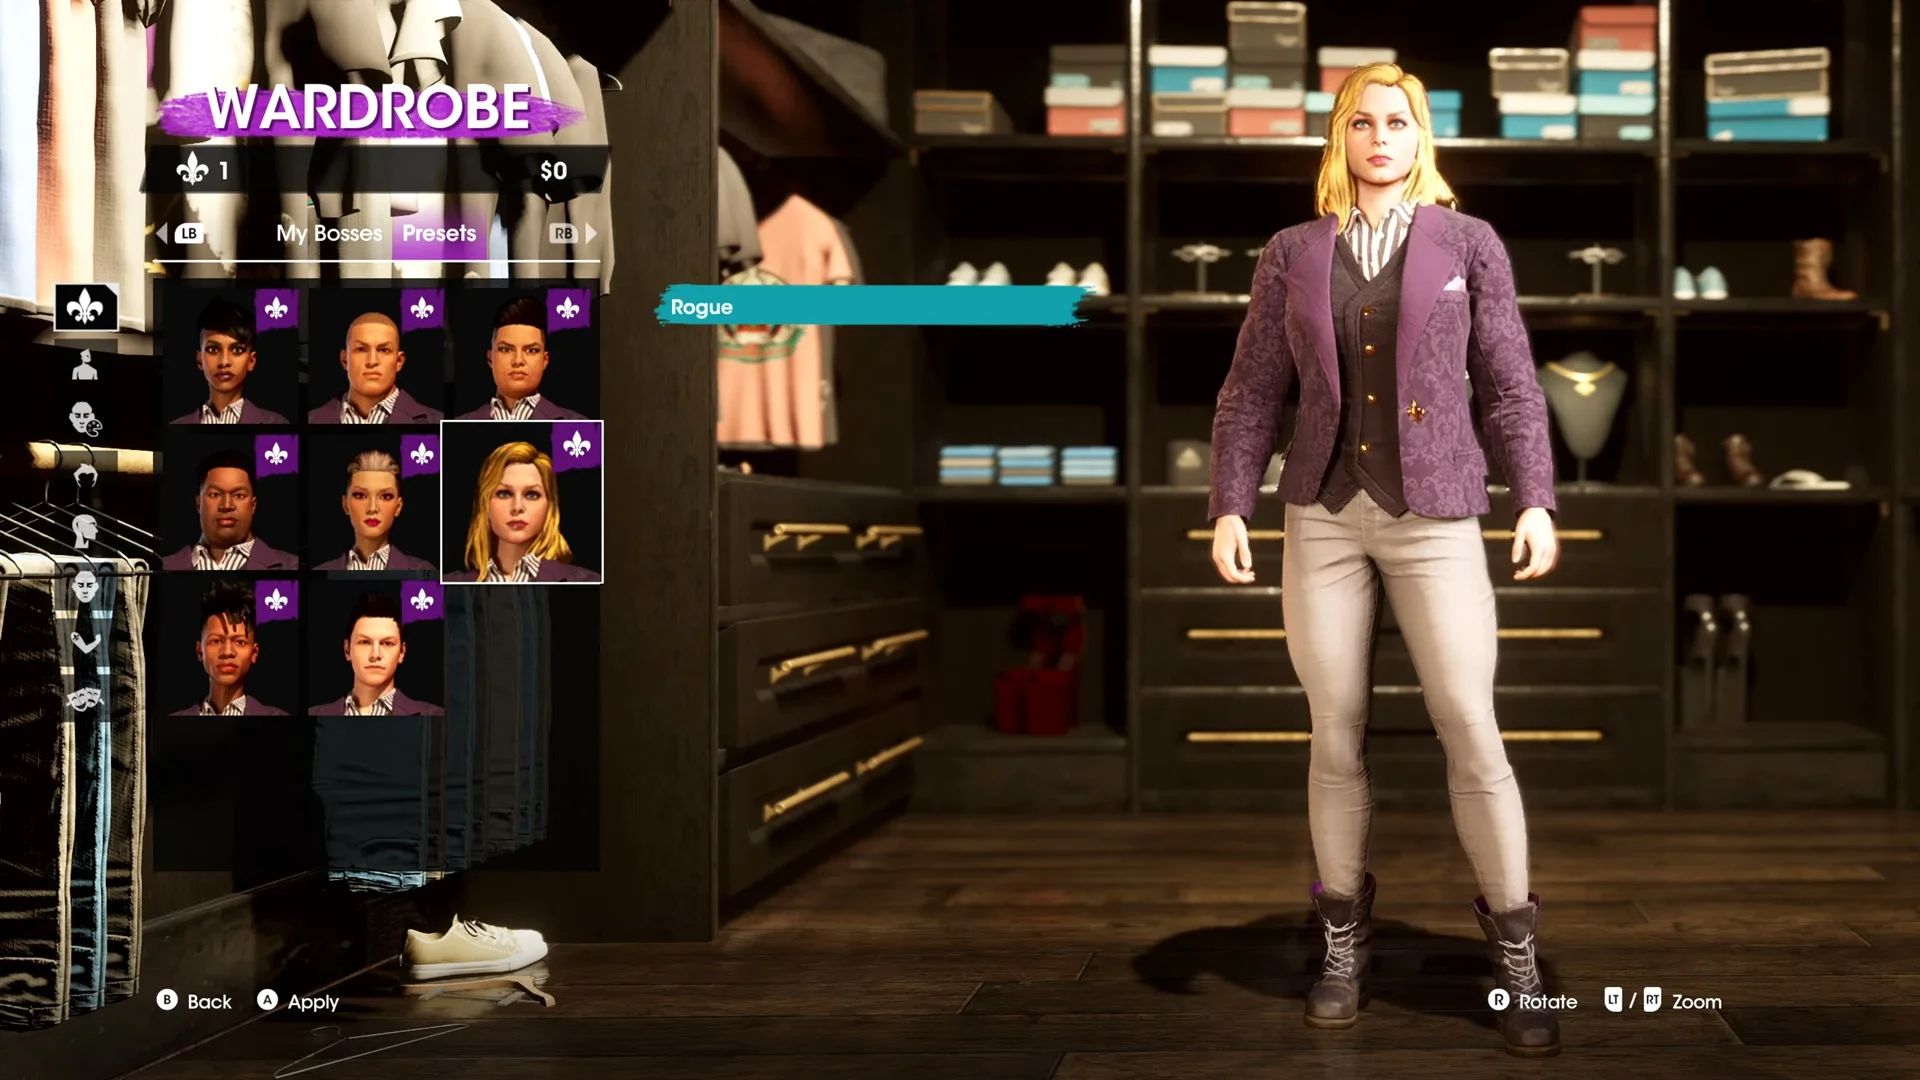 Saints Row review - an underwhelming reboot